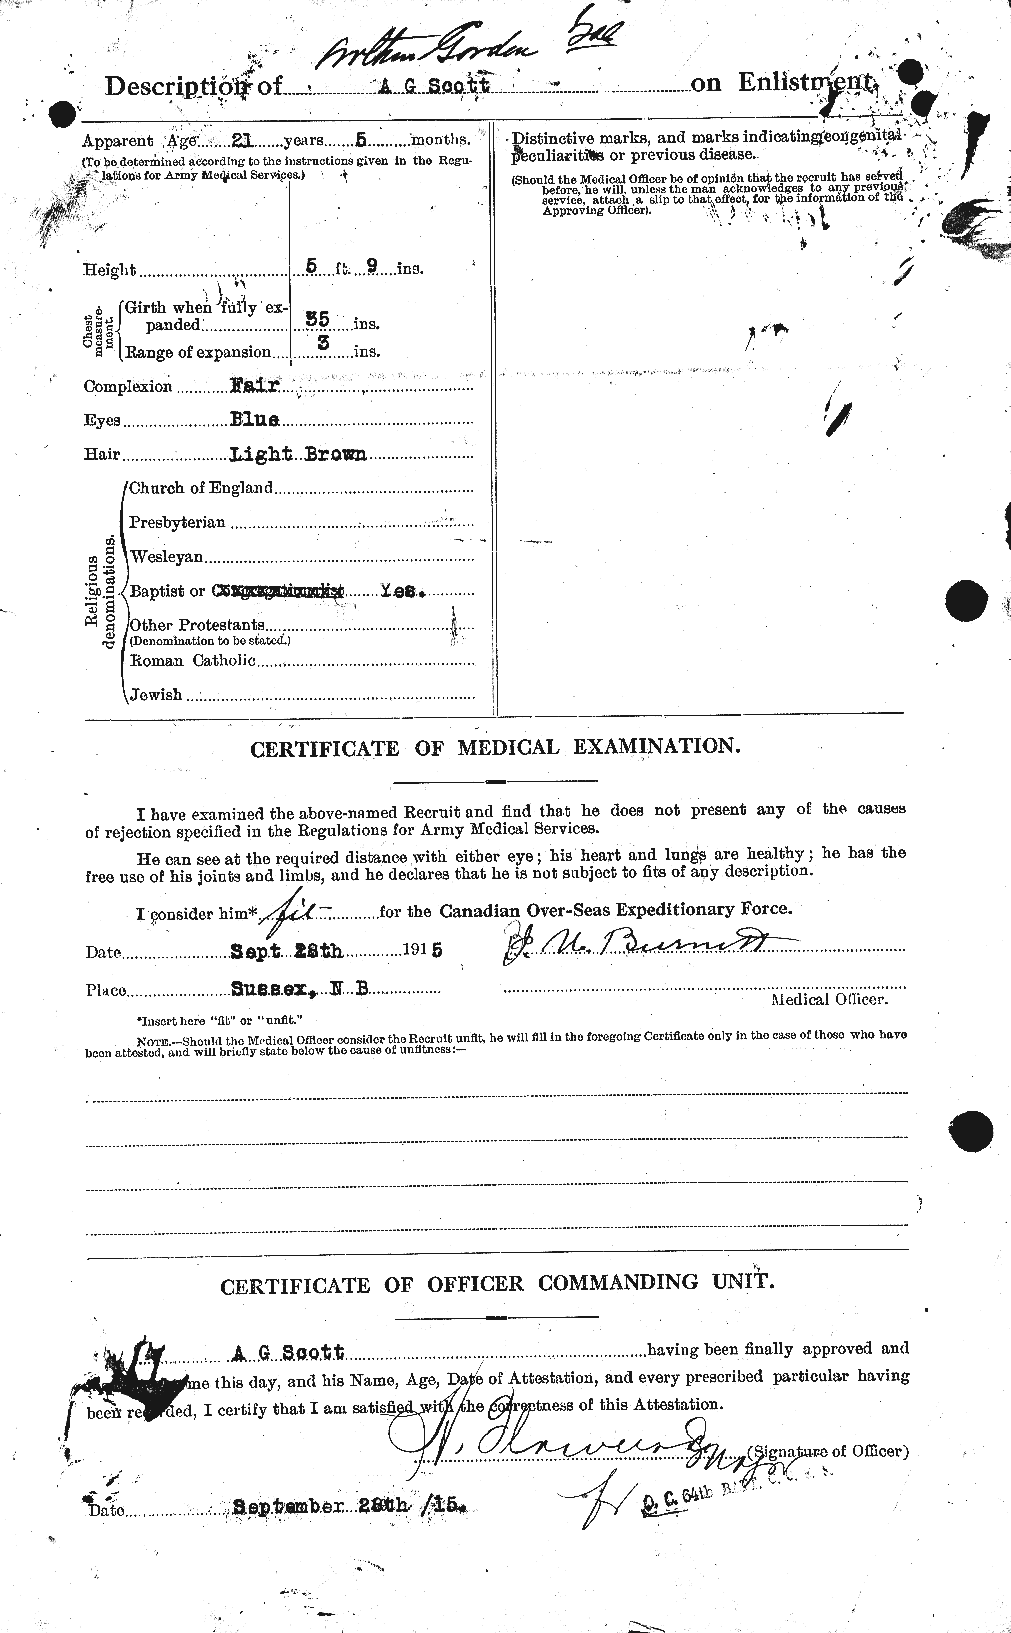 Personnel Records of the First World War - CEF 086236b